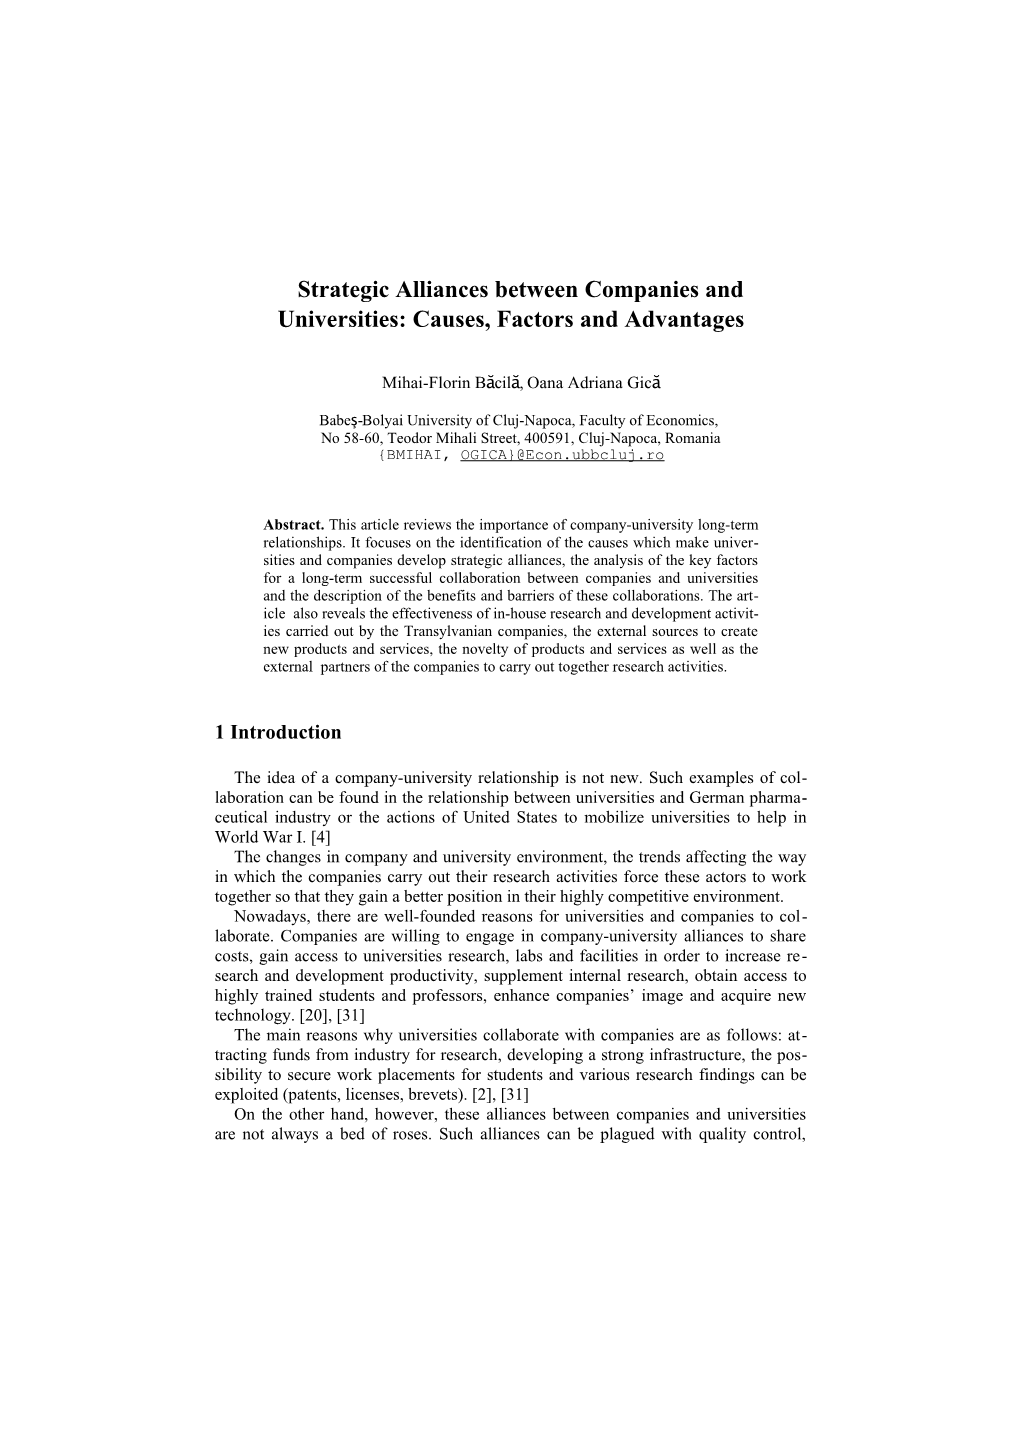 Strategic Alliances Between Companies and Universities: Causes, Key Factors and Advantages